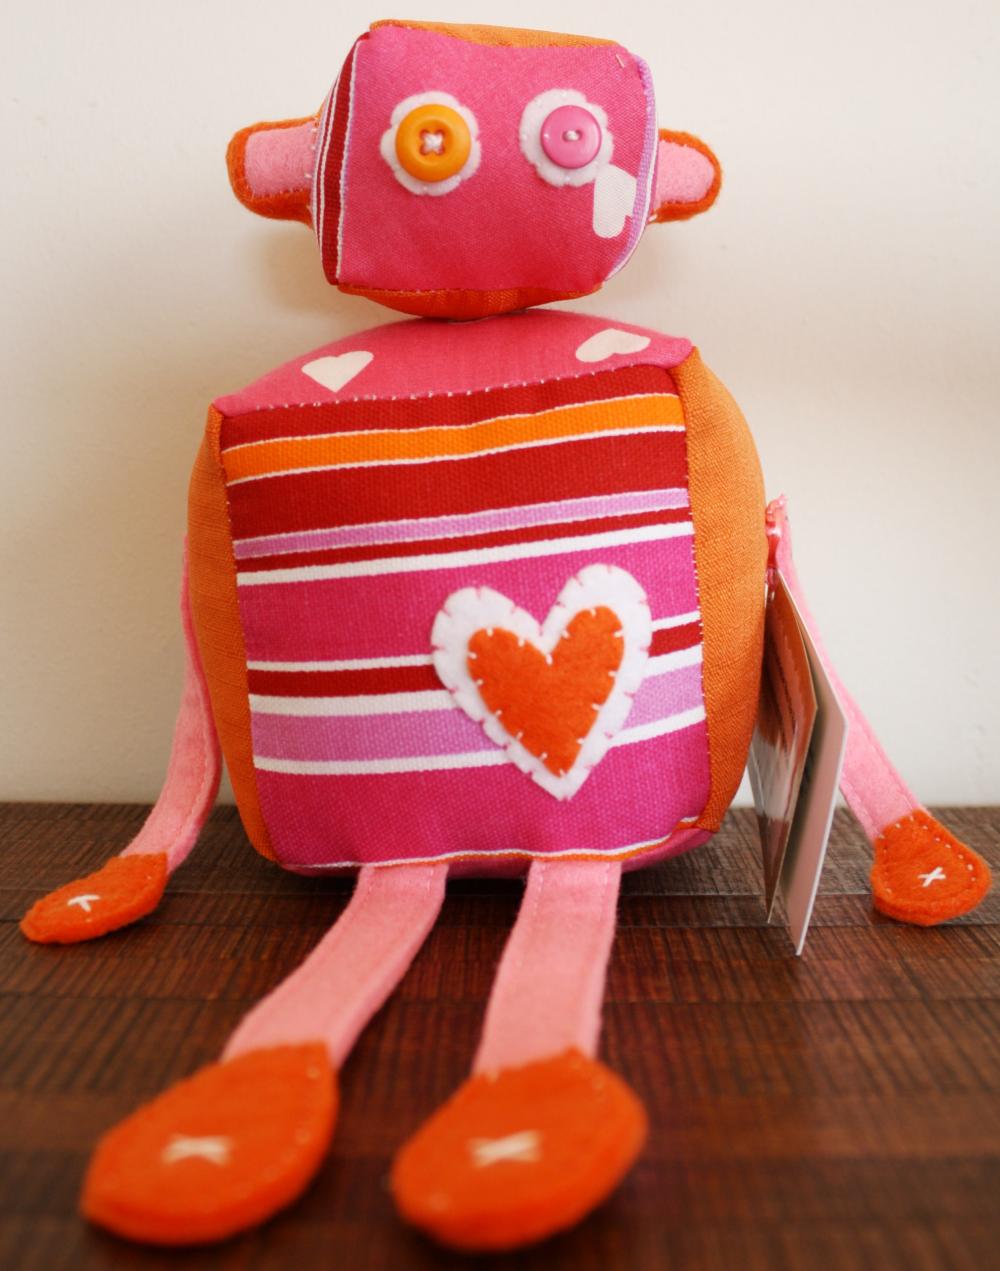 Boobeloobie Reu The Robot In Pink, Orange And White Accents